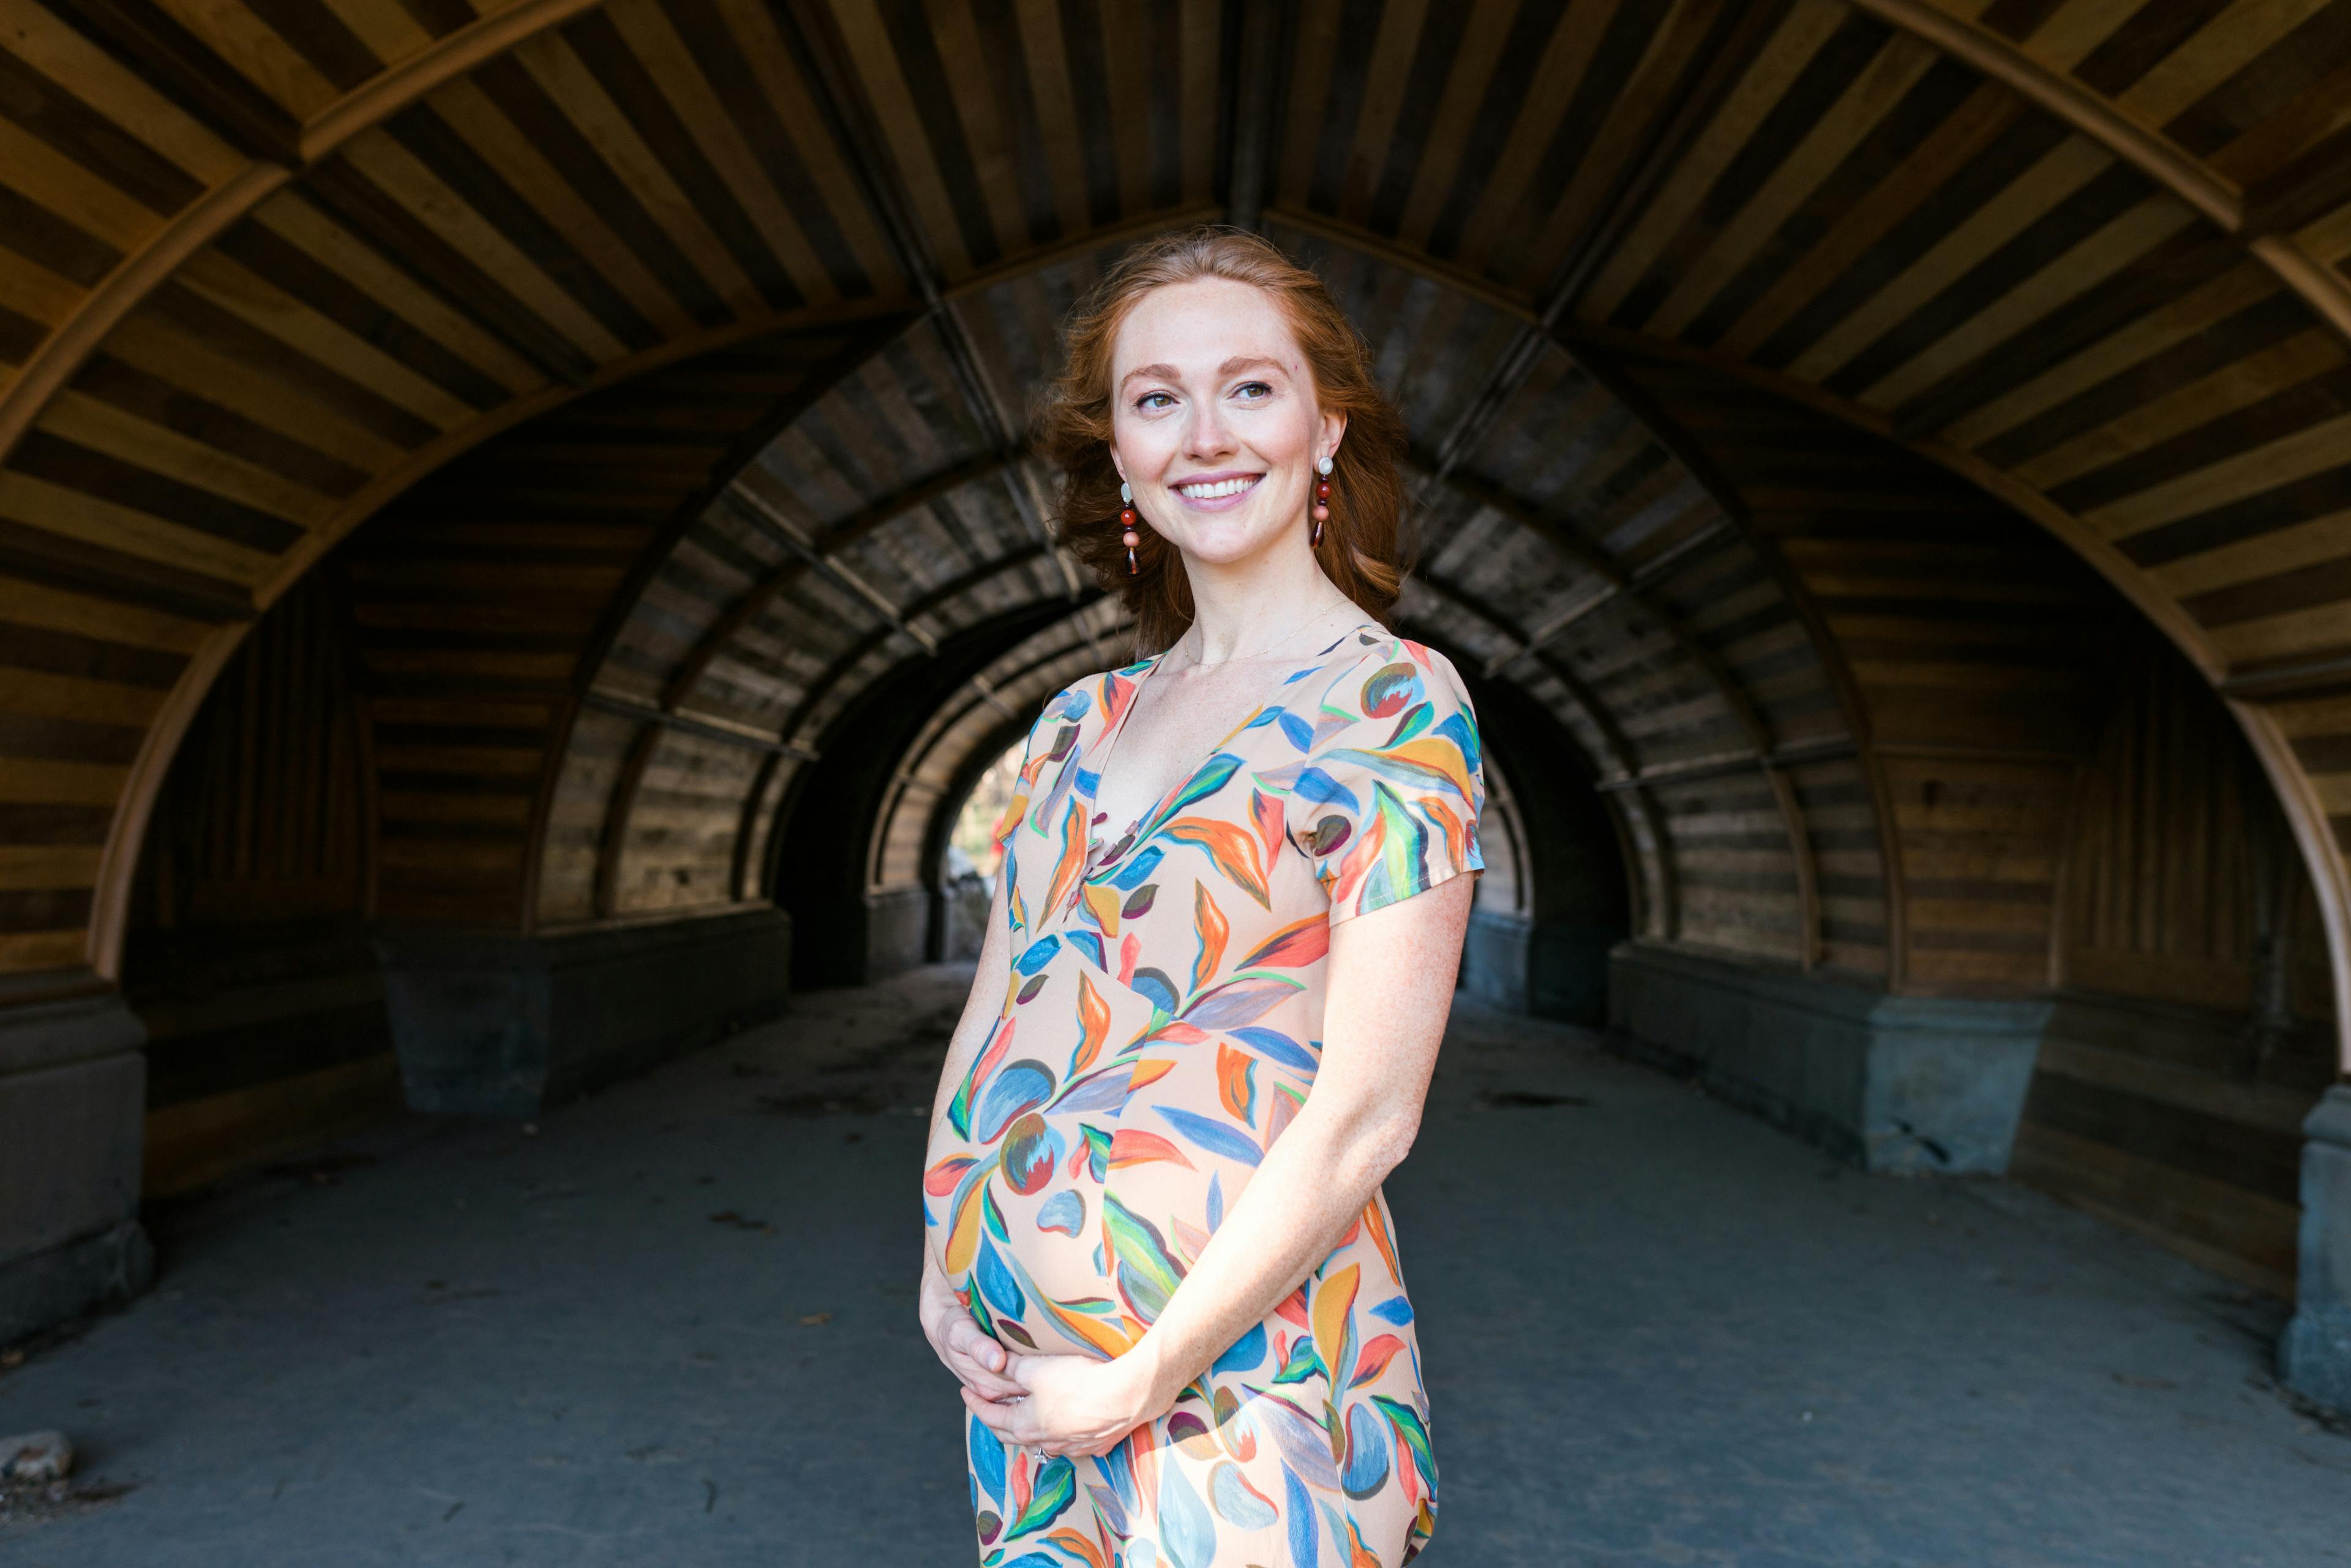 A radiant pregnant woman in a colorful dress smiling in an arched tunnel